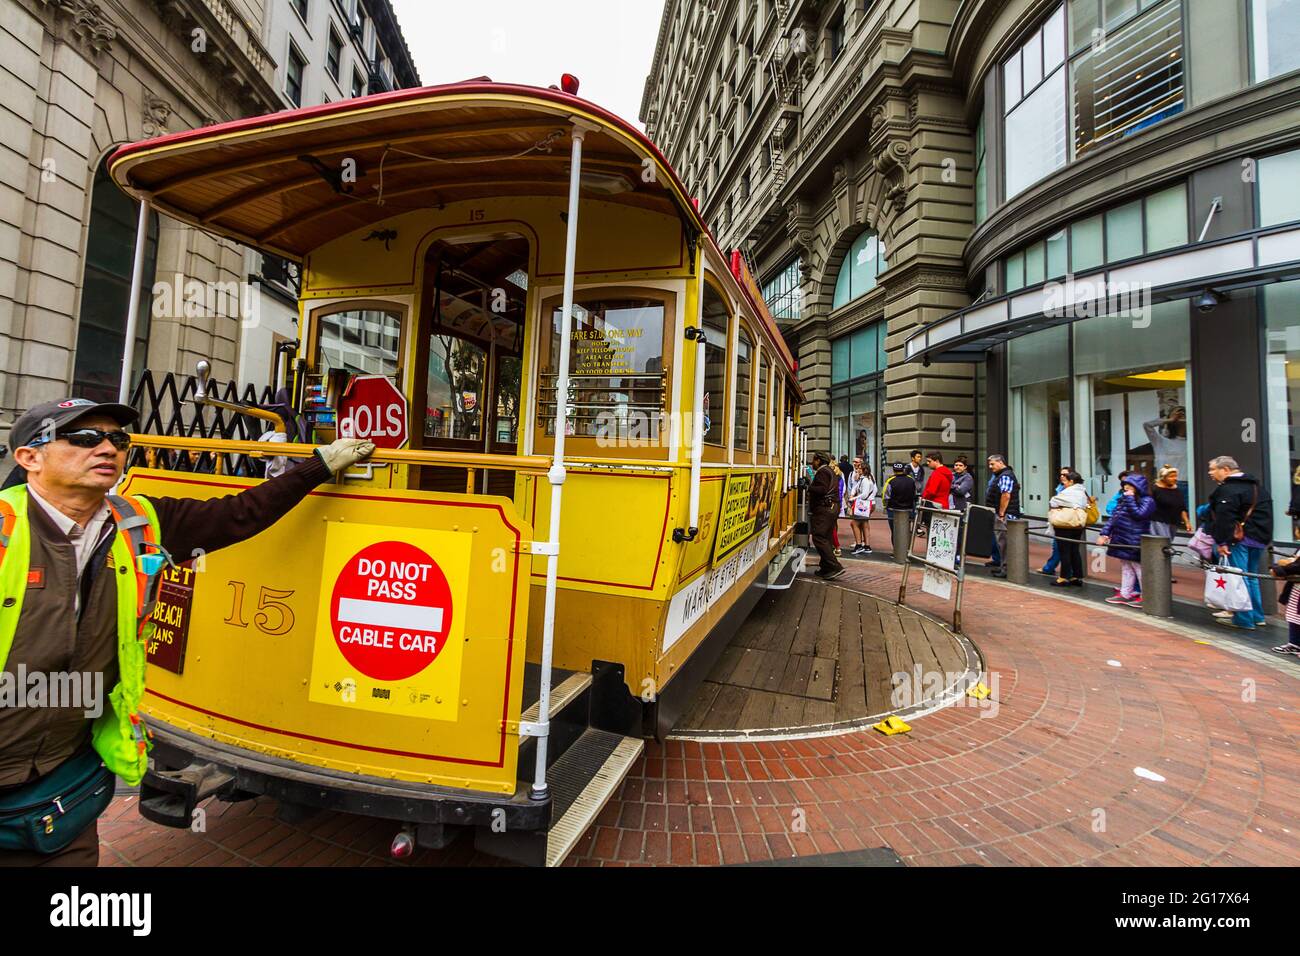 People waiting in the line to take the cable car and a worker is rotating the cable car Stock Photo